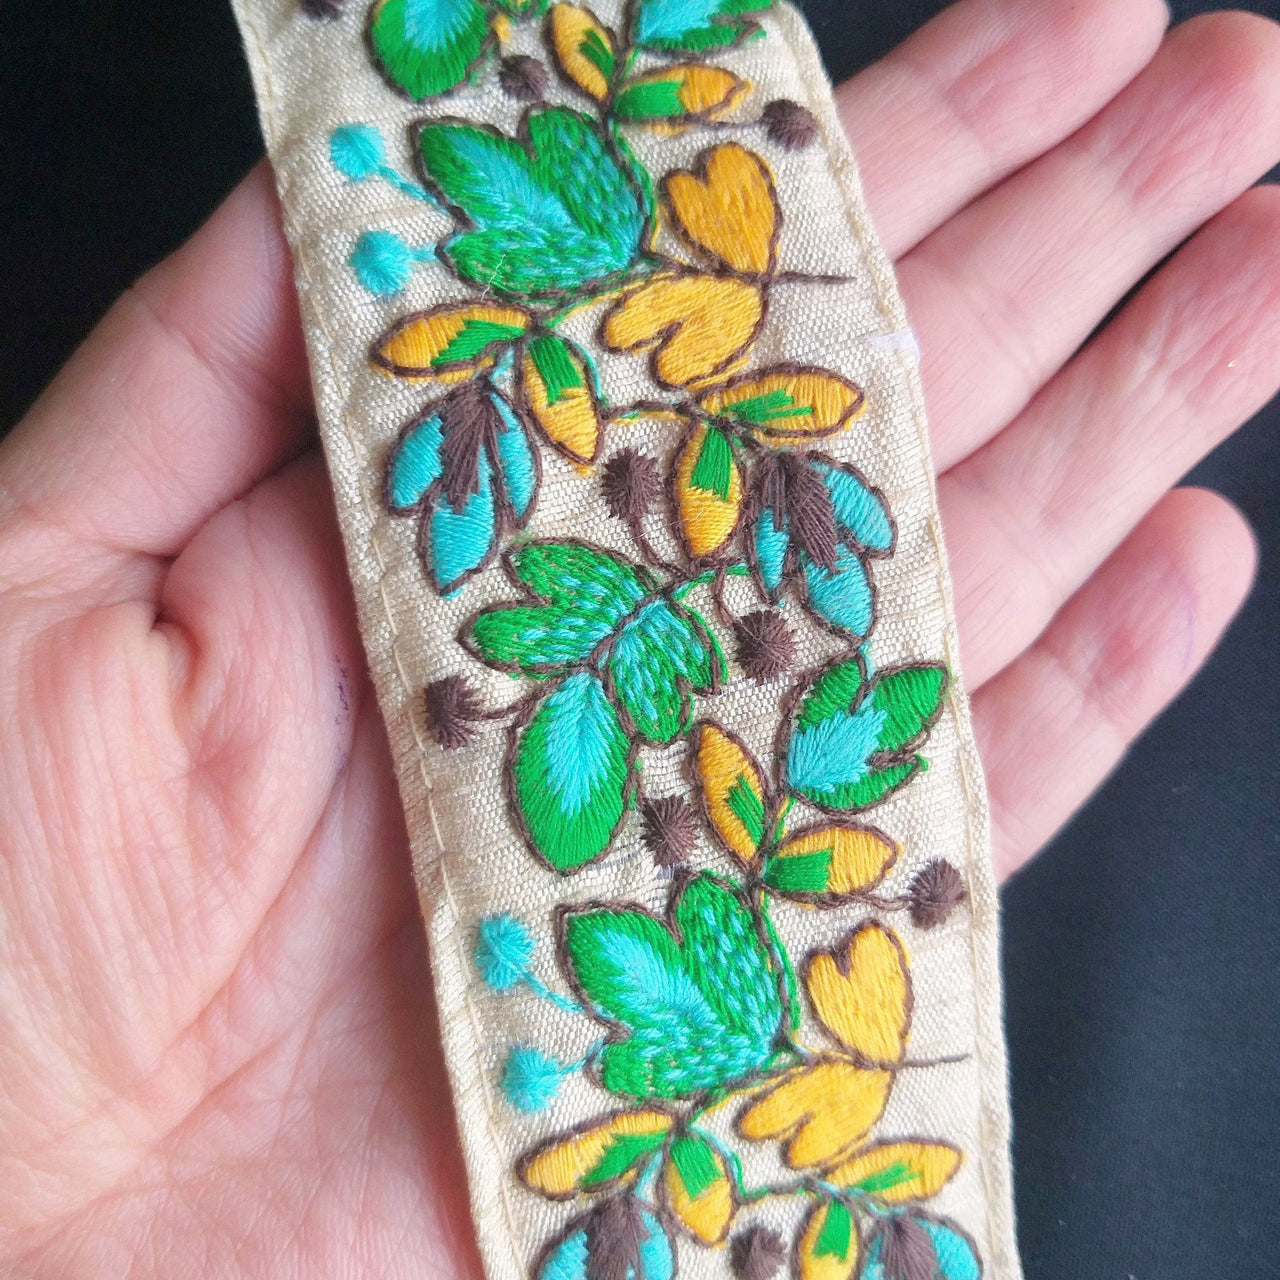 Beige Fabric Trim, Floral Embroidery in Red And Beige / Green And Yellow, Approx. 45mm- 210119L39/40